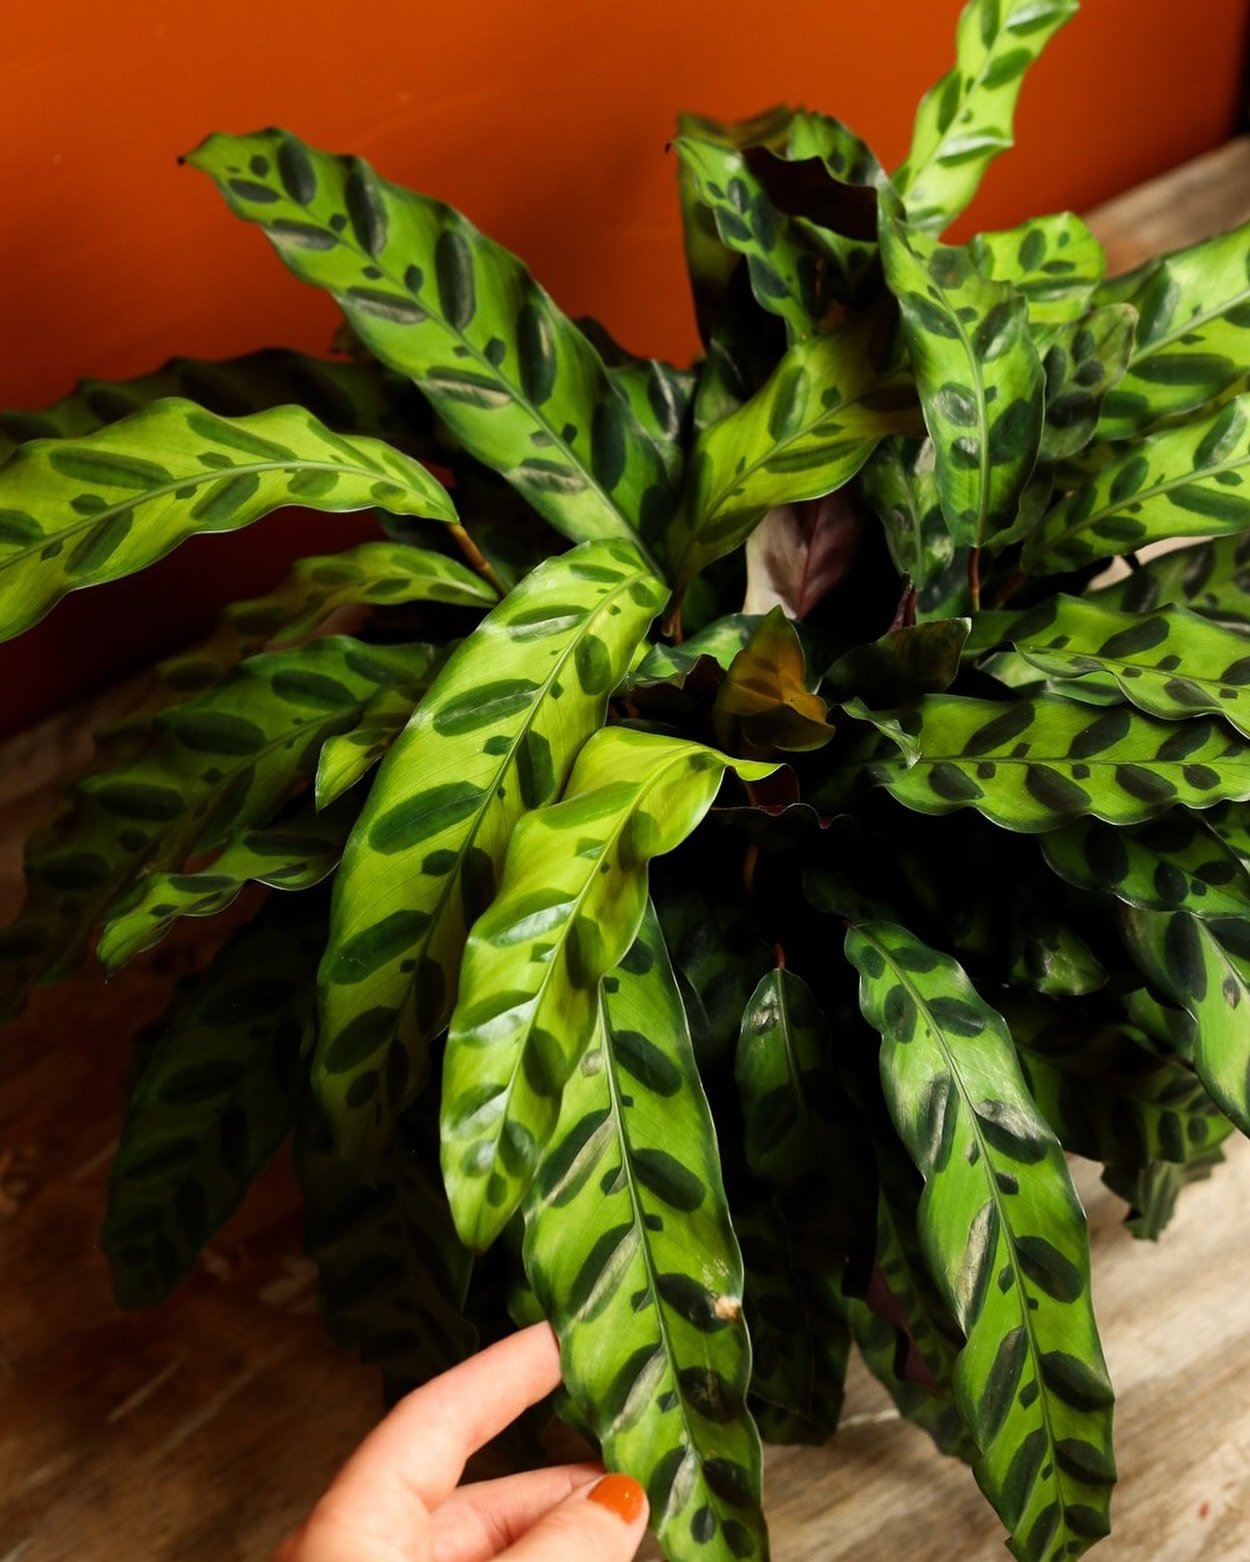 We've got some CUTE fresh green friends in the shop! Restocked some favorites and got some rare cuties too. Come see them in person first this weekend from 11-5 ☀️
.
#calathea #plantshopping #hudsonvalleyny #houseplants #houseplantlove